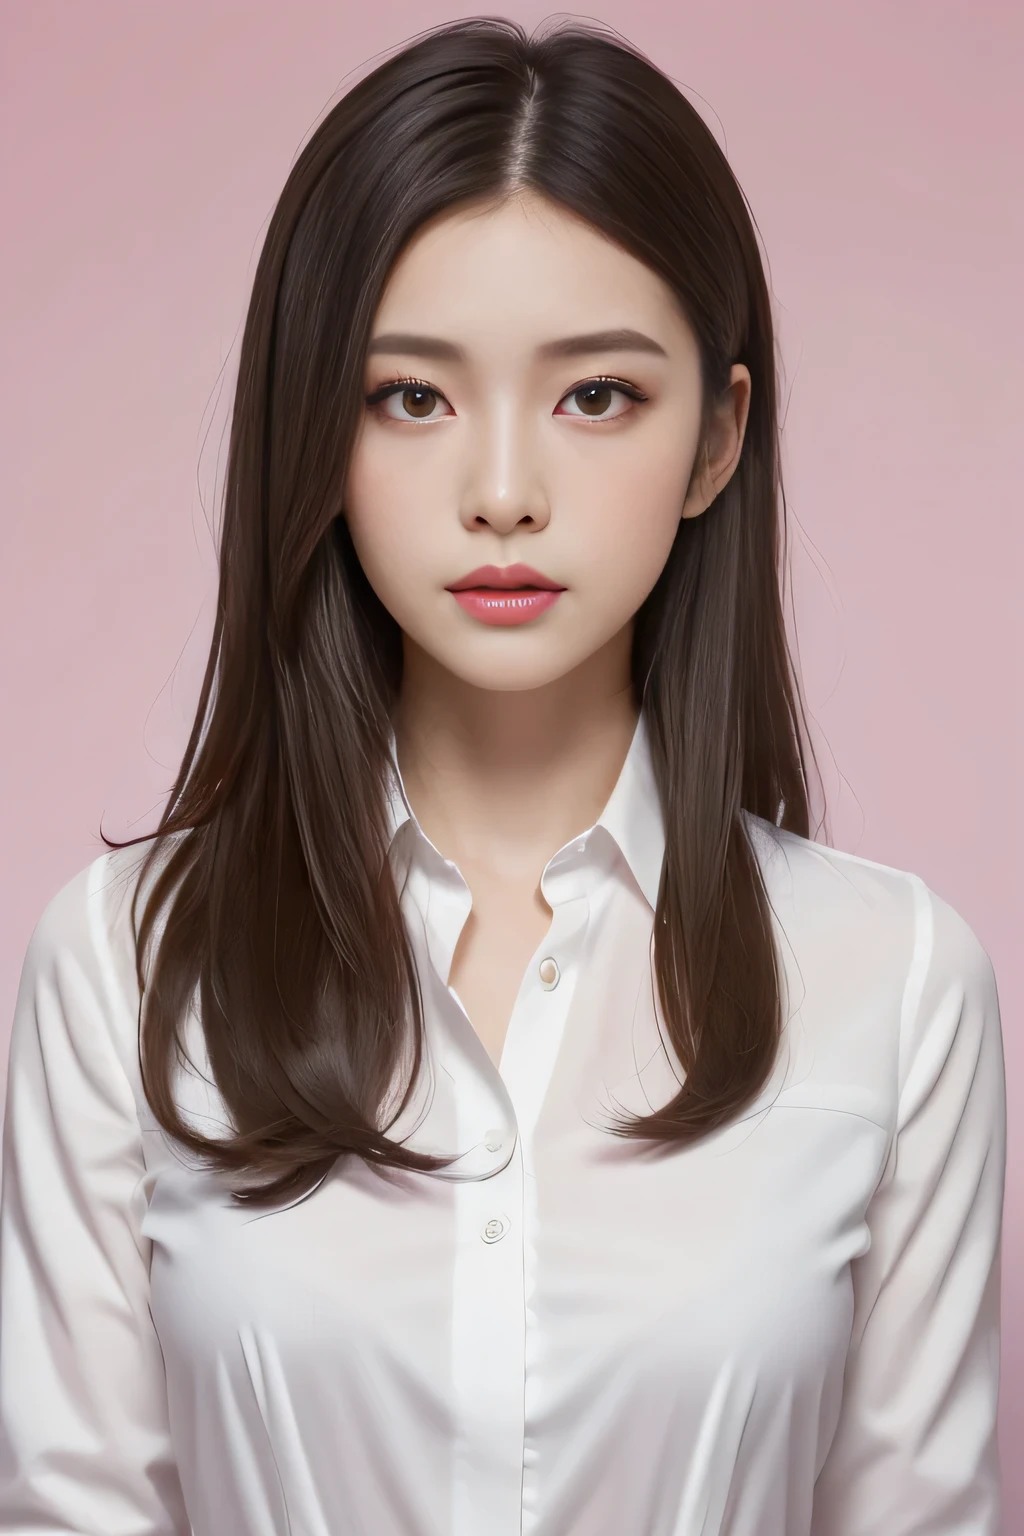 Generate with SFW, (1 girl:1.3), Upper Body Shot, Japanese, 17 year old supermodel, the body is slim, high school girl, (from before), (highest quality:1.4), 32k resolution, (Realistic:1.5), (Ultra-realistic:1.5), High resolution UHD, (masterpiece:1.2)), (Improvement of quality:1.4), (Very beautiful facial details), (Highest quality realistic skin texture:1.4), (Perfect Anatomy:1.2), (Are standing:1.37), ((school uniform)), ((Black tie, White long sleeve blouse shirt:1.21)), Black pleated skirt, (Do not emphasize the top of the bust), ((pink background color:1.15)), Accurate Fingers, Very detailed, Symmetrical eyes, Fine eyelashes, Thinly trimmed eyebrows, View audience, Natural Makeup, [Pink lipstick], ((A good eye for quality:1.2)), (tired, Sleepy and satisfied:0.0), (Beautiful Lips:1.33), (Great nose:1.2), ((Physically Based Rendering of the Background:1.37)), (medium breast), Tight waist, (Heavy chest:1.05, slim lower body), Brown Hair, (layered hair:1.37), Anxious face, Gentle light illuminates the face and body, Spectacular and inspiring cinema lighting